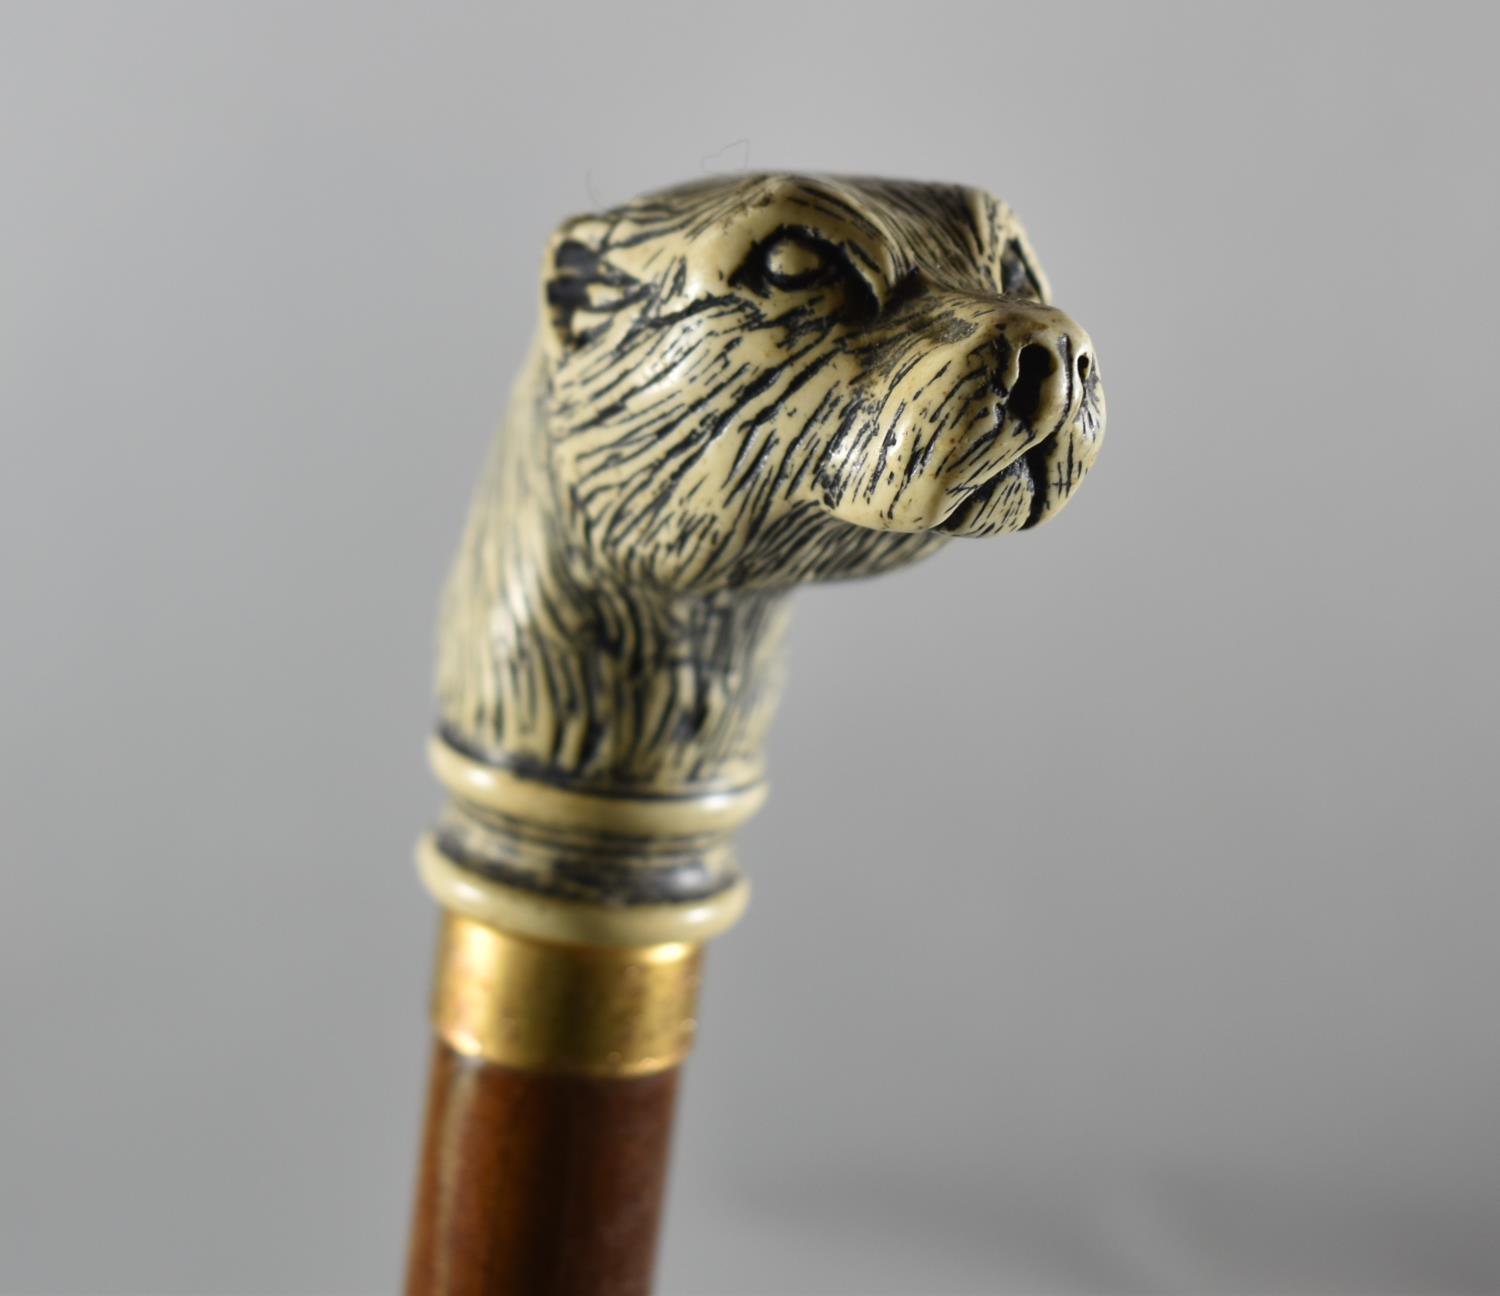 A Modern Walking Cane with Resin Otter's Head Handle, 91cm Long - Image 2 of 2